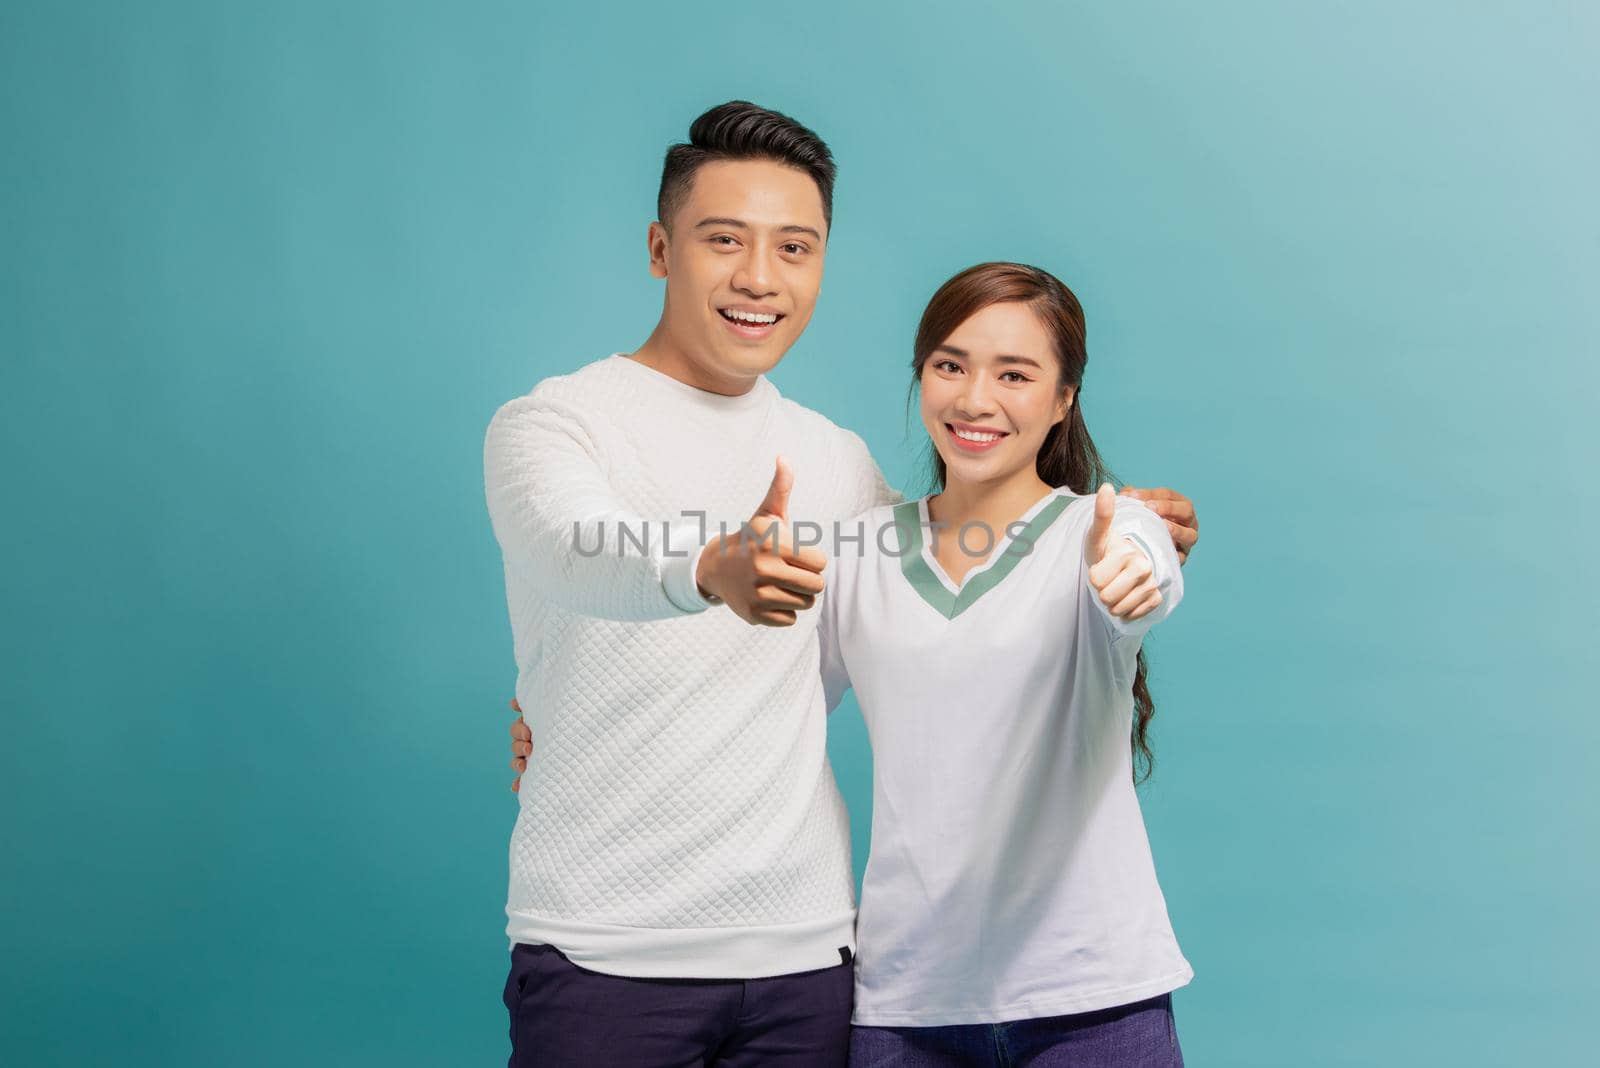 Happy young lovely couple showing thumbs up and looking at the camera over light blue background